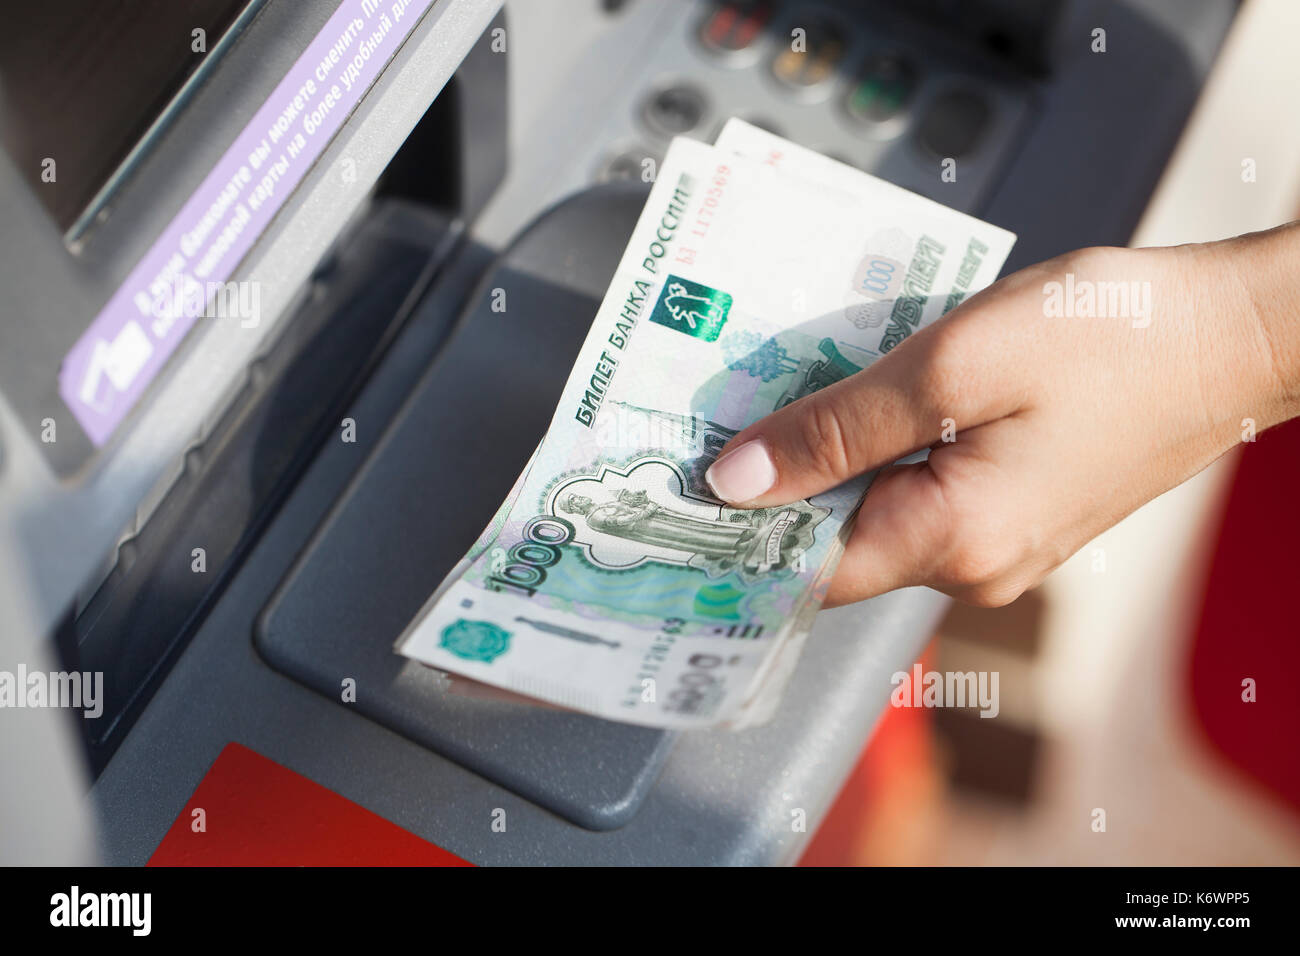 Russian rubles cash. Repayment on credit. Woman hand withdrawing money from outdoor bank ATM Stock Photo